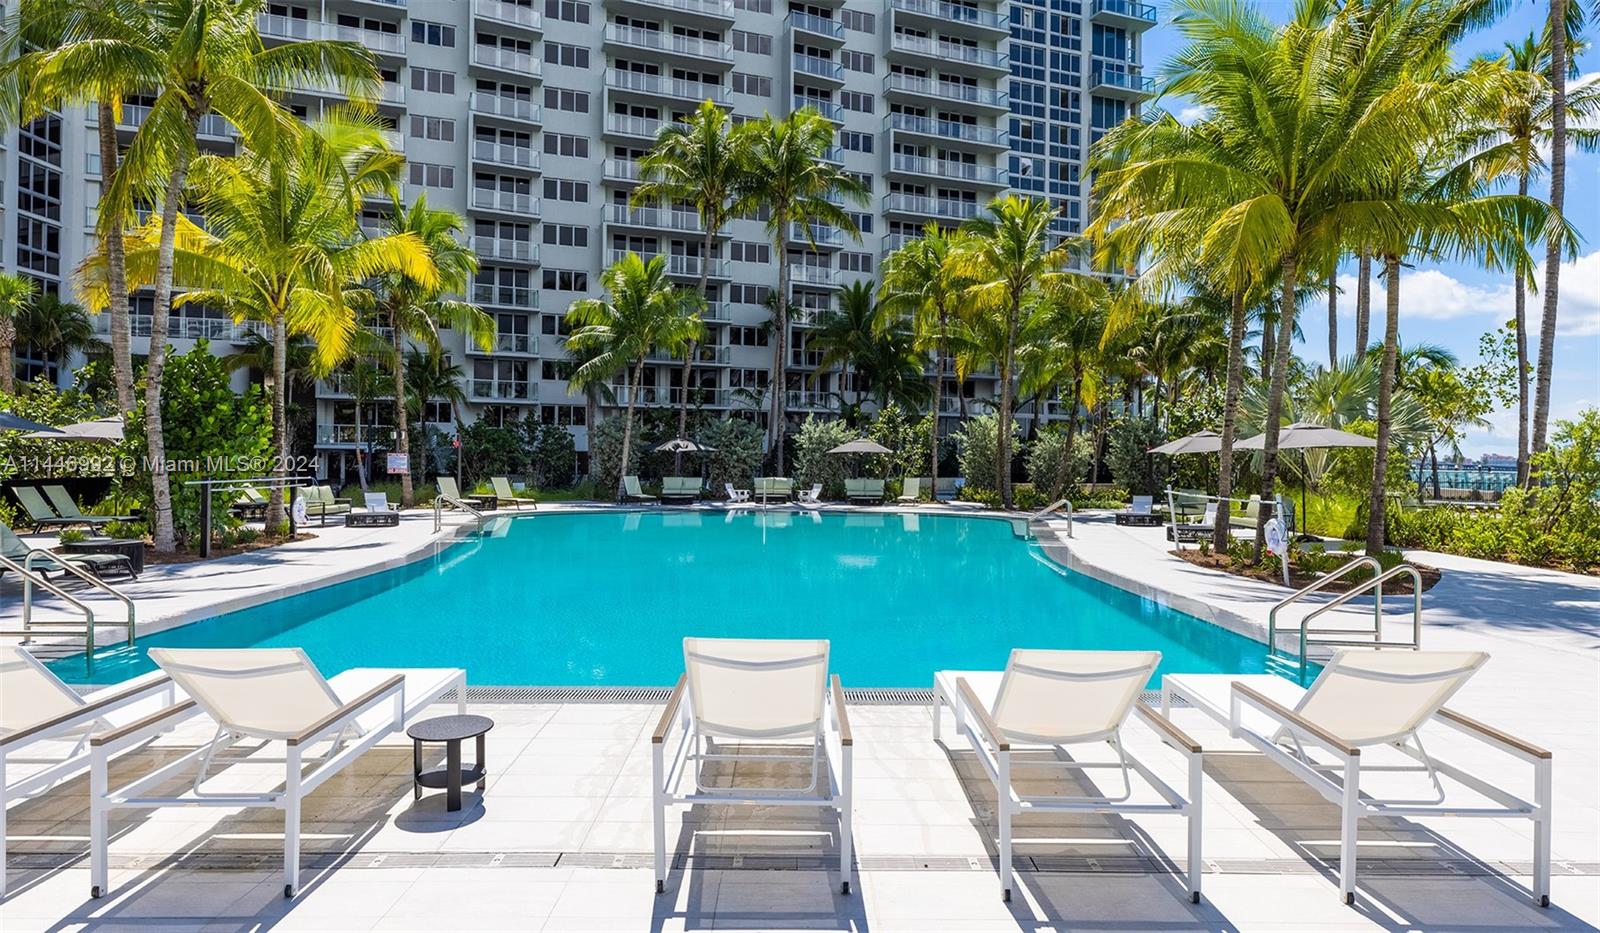 *Receive one month free on immediate move-in, apply by 05/12. AVAILABLE 08/14. Welcome Miami Beach's residential community, Flamingo Point. This 1 bed has courtyard & bay views. The interior features wood floors, modern kitchen w/ Stainless Steal appliances and granite counter tops. Amenities include fitness center, 2 resort style bay front pools surrounded by cabanas, lounge chairs and a, a BBQ area. Move-in 1 month + $1,500 deposit. Parking $117/month. Pet Fee: $500+$50/month. *FAST APPROVAL! (NOTE: Rental rates are subject to change depending on move-in date and lease term. Advertised rate is best rate and maybe on leases longer than 12 months. Proof of income greater than 3x 1 month's rent is required and minimum credit score of 620 or higher in order to be approved).